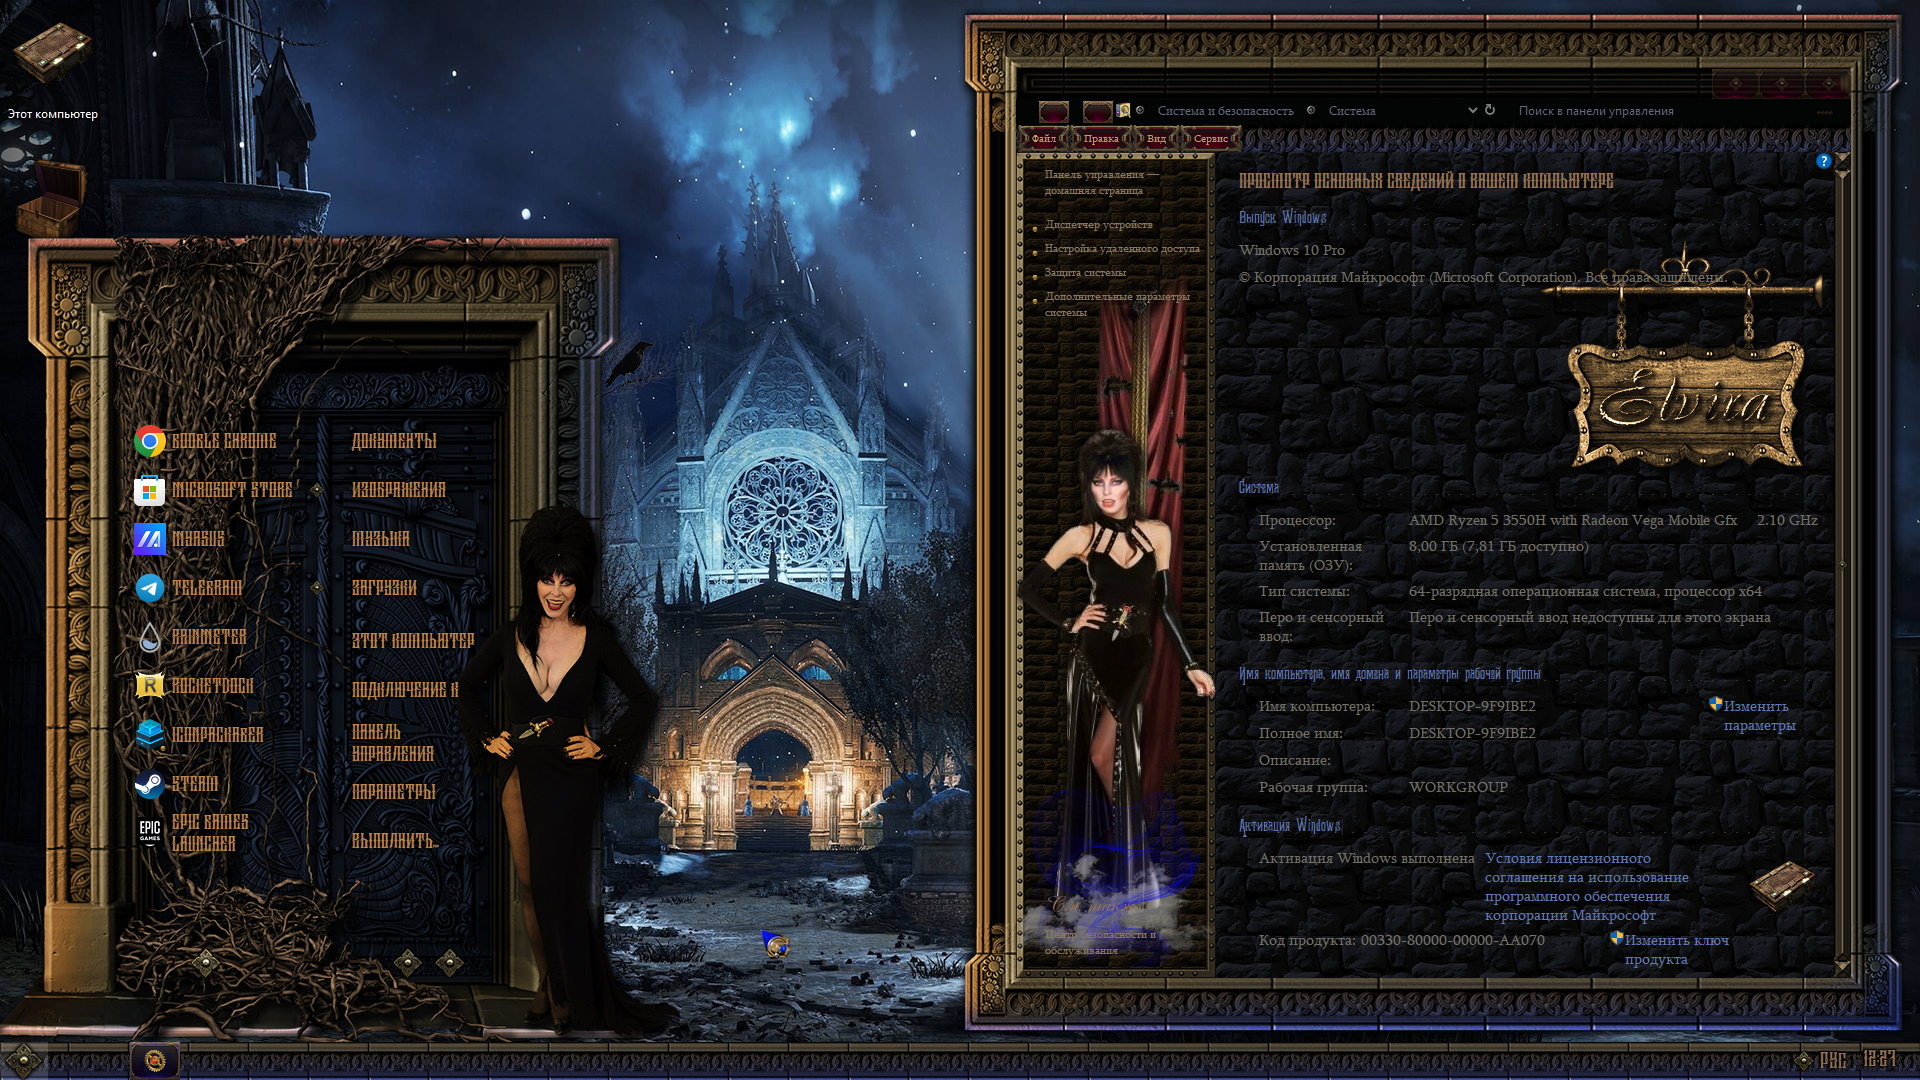 MISTRESS OF THE DARK Premium Themes for Windows 10 by ORTHODOXX67